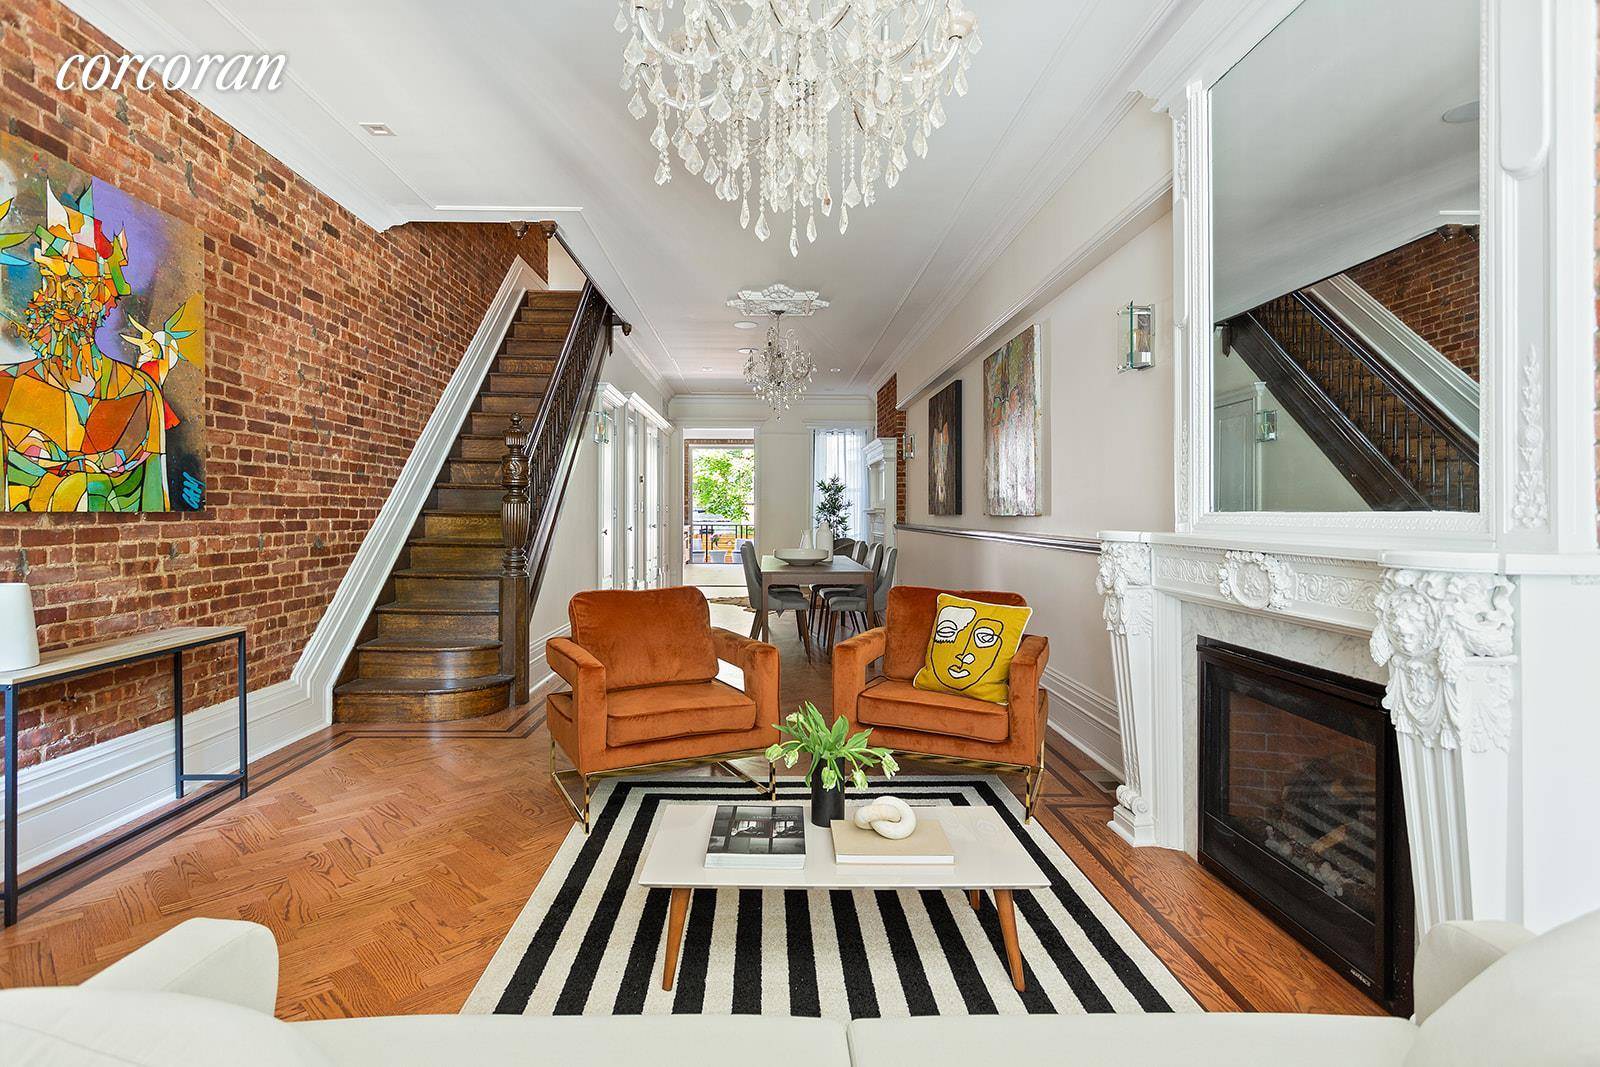 Welcome to your state of the art, luxury smart home at 519 West 141st Street in the Hamilton Heights section of Harlem.